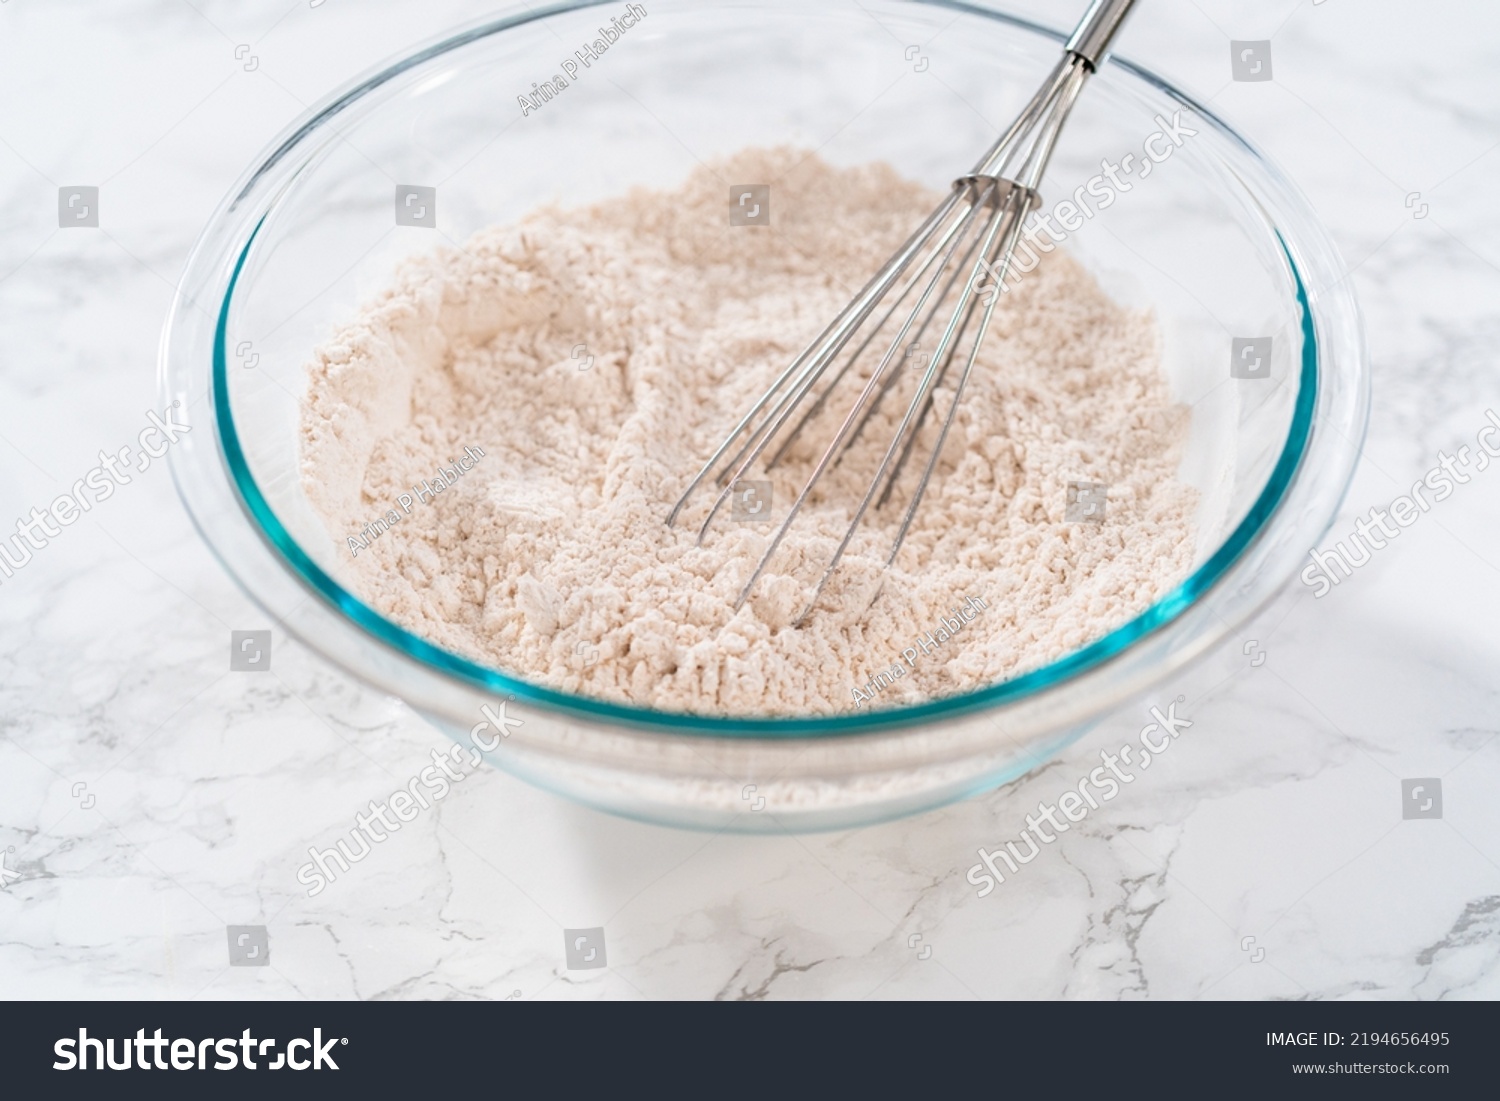 Mixing dry ingredients in a large glass mixing bowl to bake eggnog cookies with a chocolate gingerbread man. #2194656495